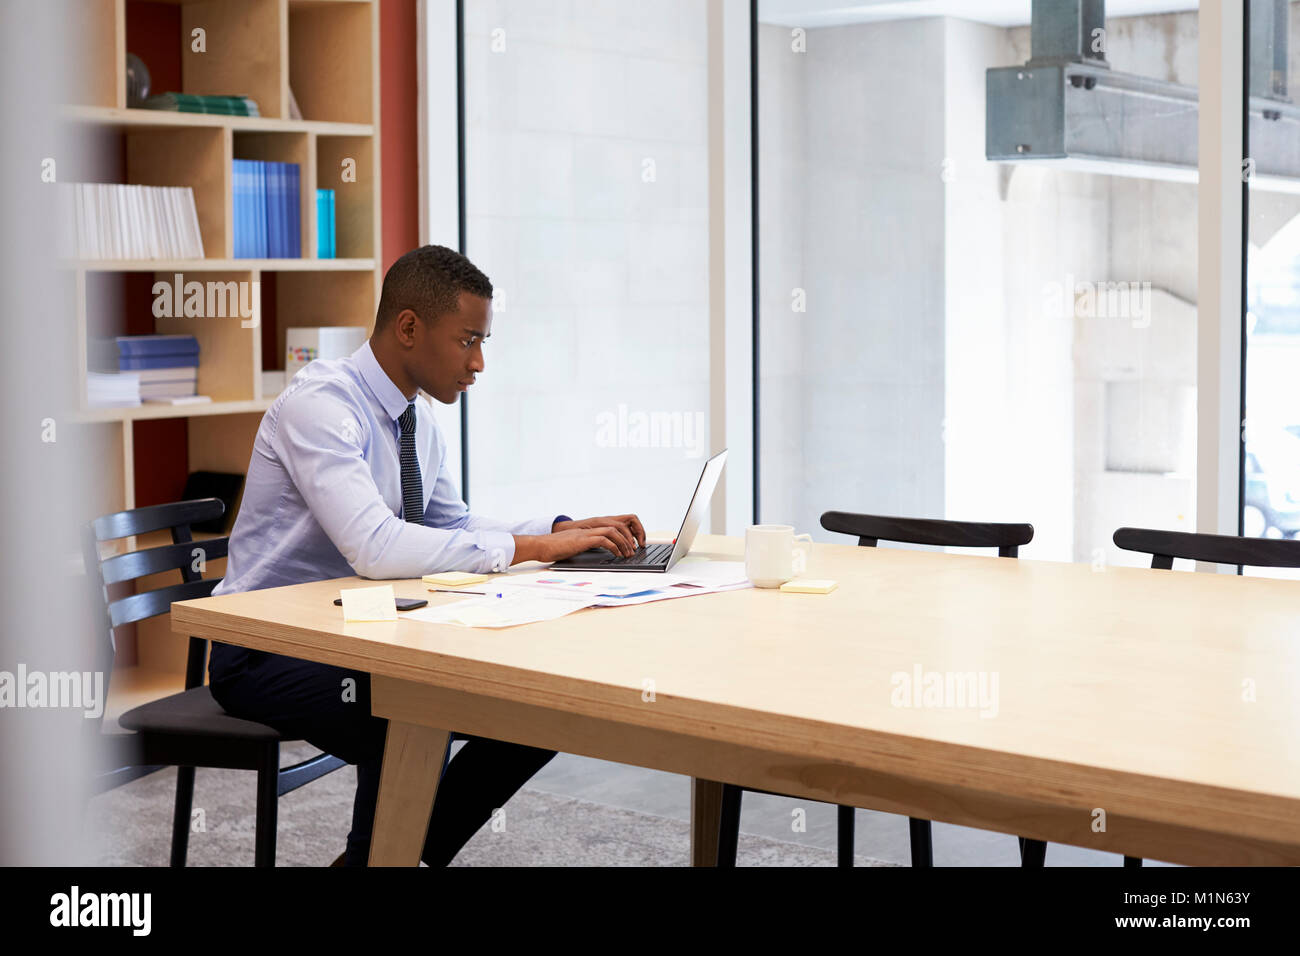 Young black businessman working alone in an office Stock Photo